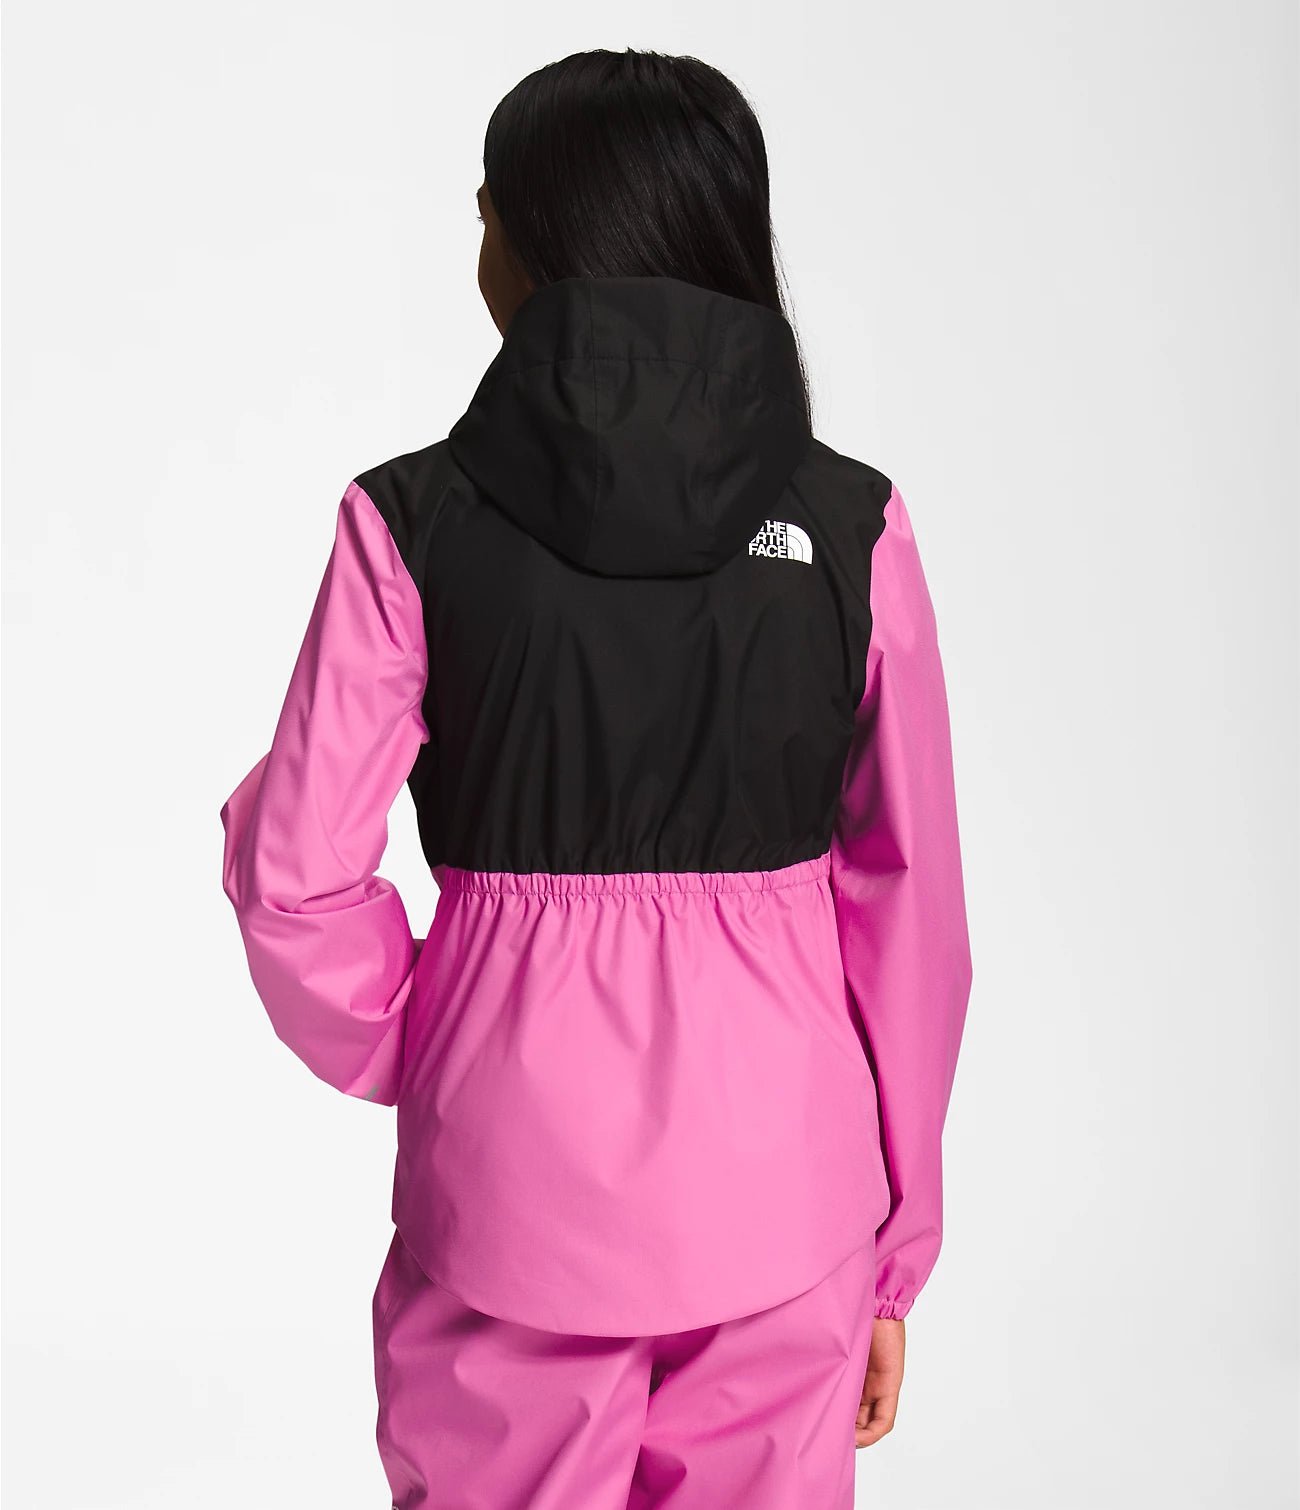 Back view of a Smiling girl wearing Super Pink The North Face Girls' Warm Storm Jacket - Mountain Kids Outfitters: Stylish and Weather-Ready Outerwear